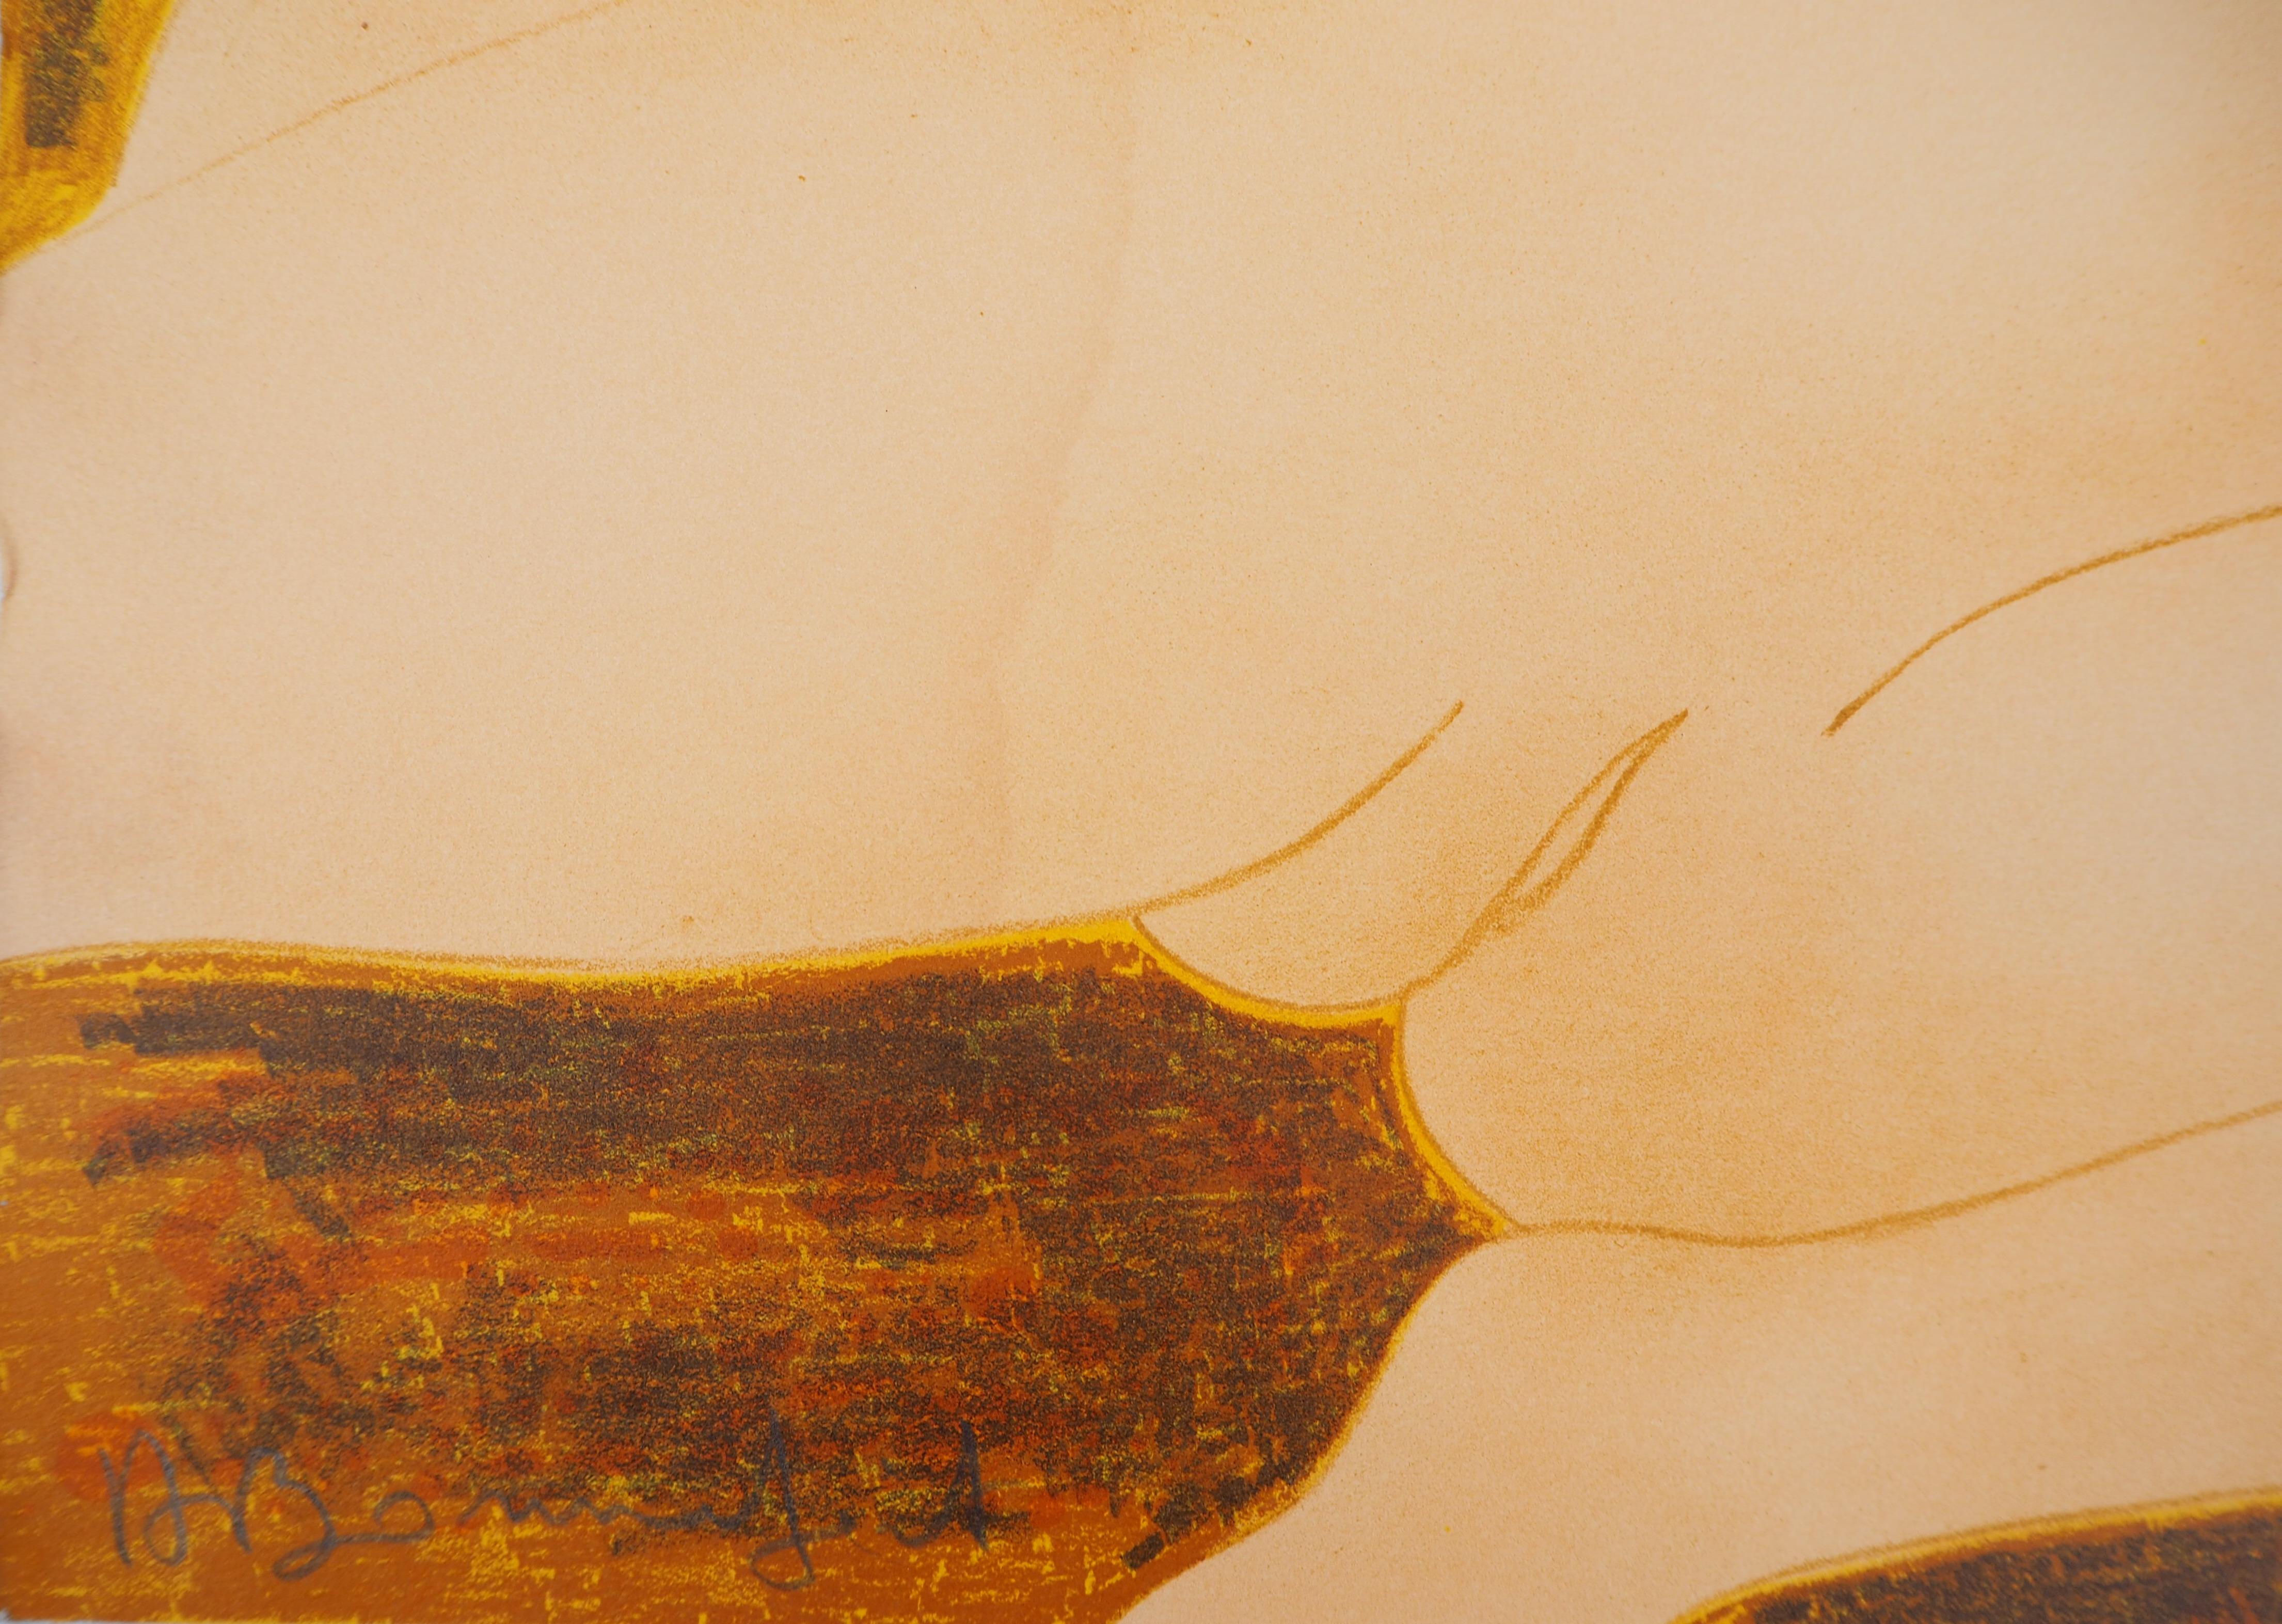 Relaxing Nudes - Original lithograph, Handsigned and Numbered /100 - Print by Alain Bonnefoit